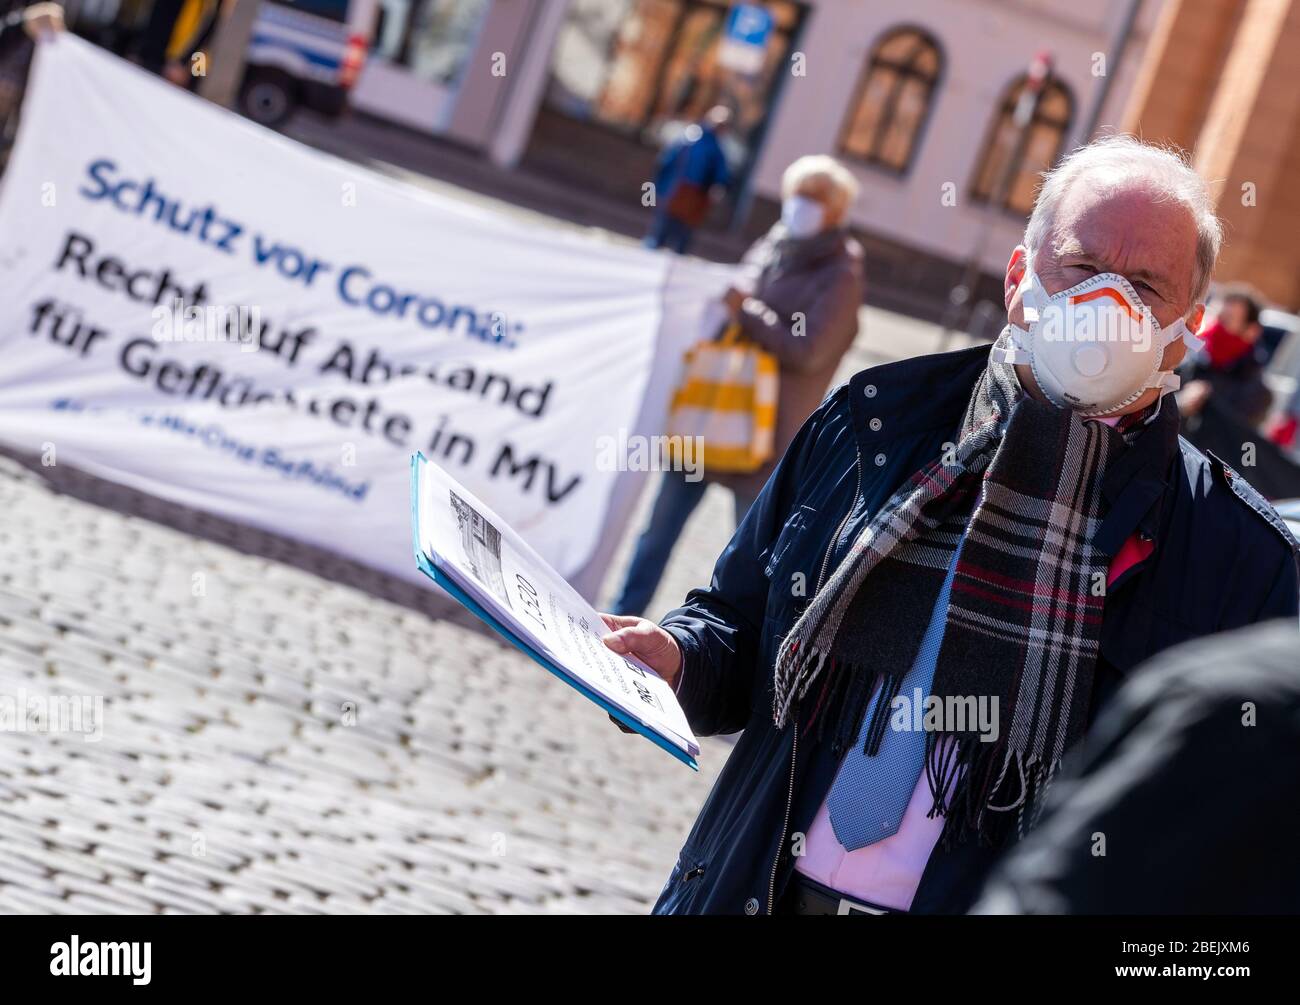 Schwerin, Germany. 14th Apr, 2020. Thomas Lenz, State Secretary in the Ministry of the Interior of the State of Mecklenburg-Western Pomerania, wearing a face mask, accepts the collection of 1,500 signatures from members of the Initiative Pro Bleiberecht (Initiative for the Right of Residence). The petition calls for the right to stay away in accommodations for asylum seekers. The administrative court had previously lifted a ban on assembly. Credit: Jens Büttner/dpa-Zentralbild/dpa/Alamy Live News Stock Photo